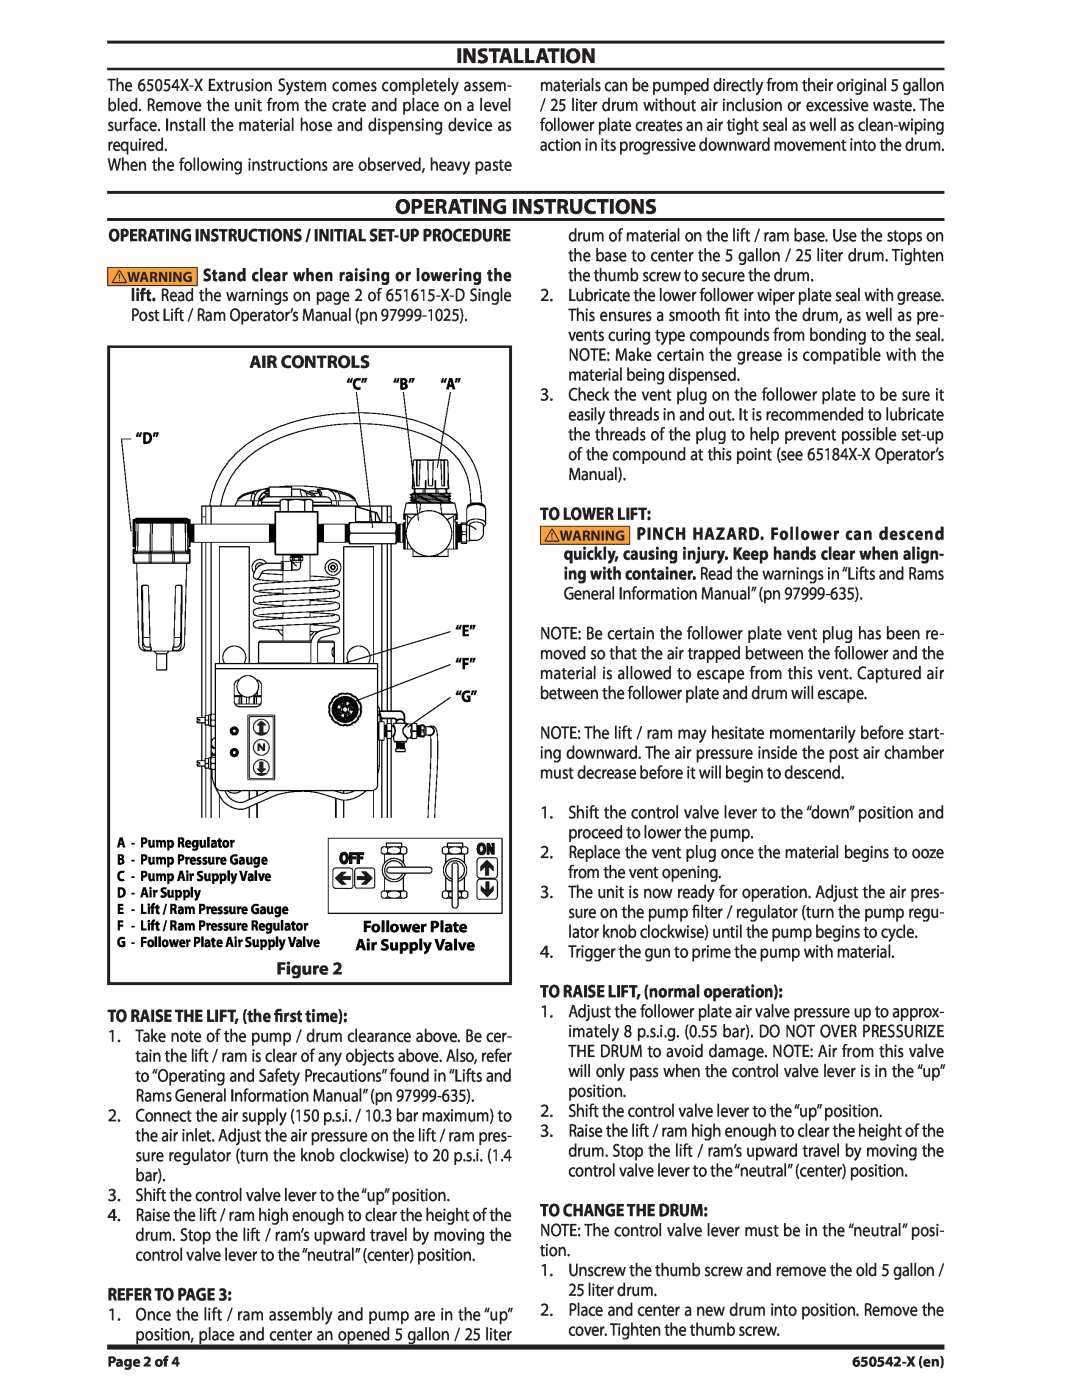 Ingersoll-Rand 650542-X, 650543-X Installation, Operating Instructions, Air Controls, TO RAISE THE LIFT, the first time 